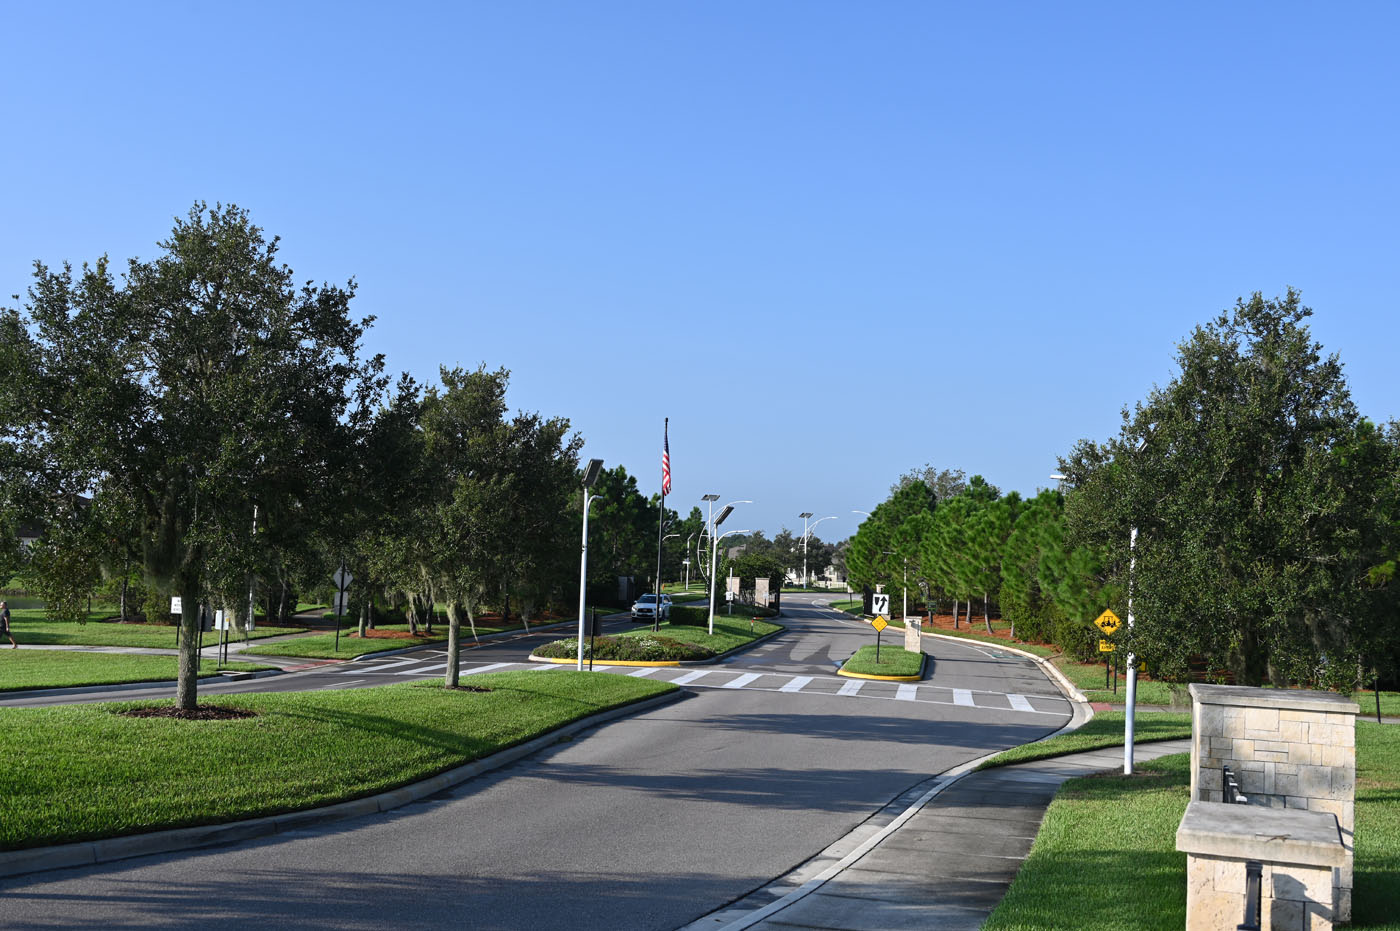 Epperson Community entrance and crosswalk